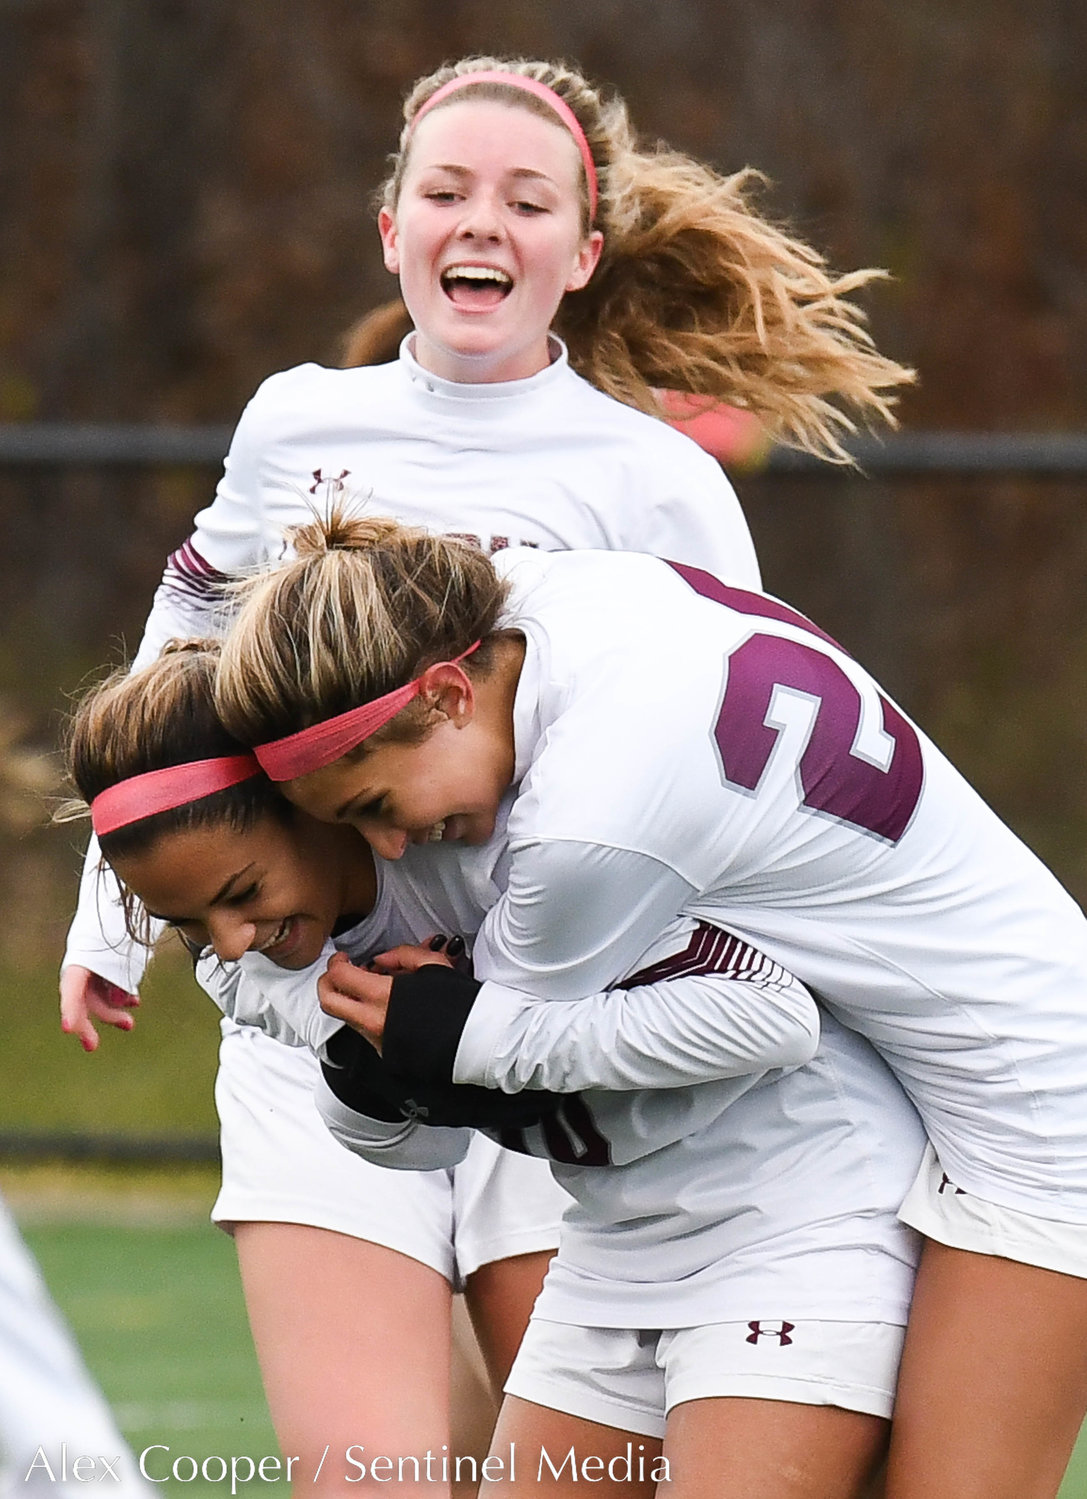 Albertus Magnus players celebrate after scoring a goal in the Class A state final against New Hartford on Sunday at Tompkins-Cortland Community College.